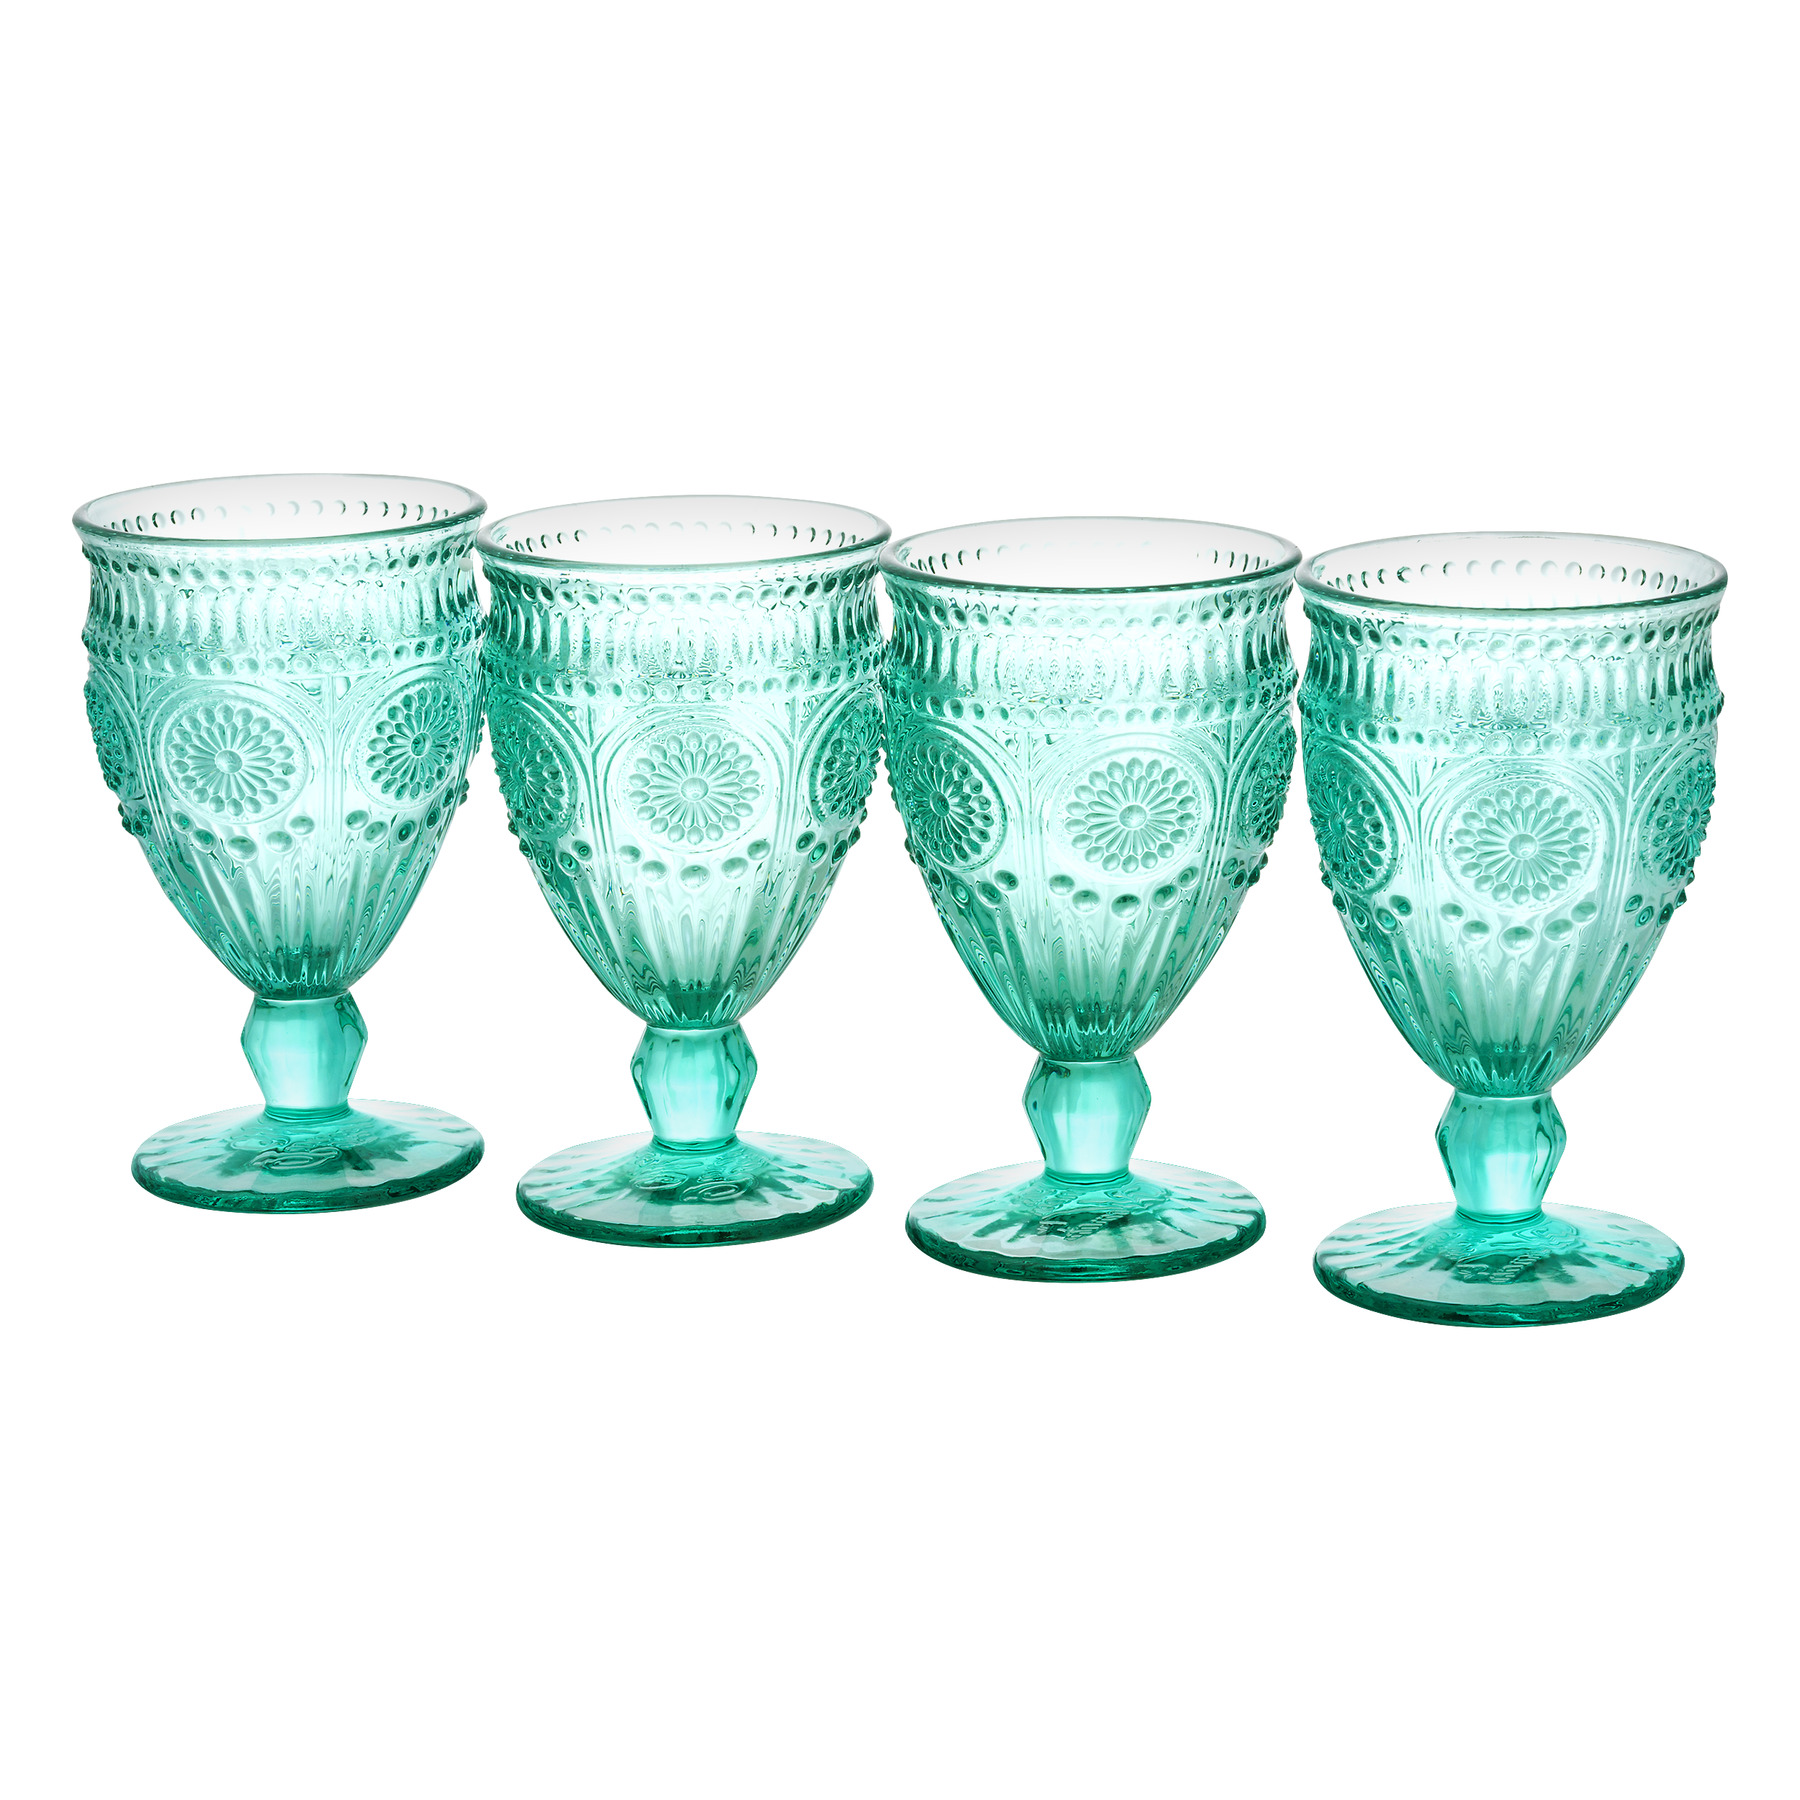 The Pioneer Woman Adeline 12-Ounce Footed Turquoise Glass Goblets, Set of 4 - image 3 of 5